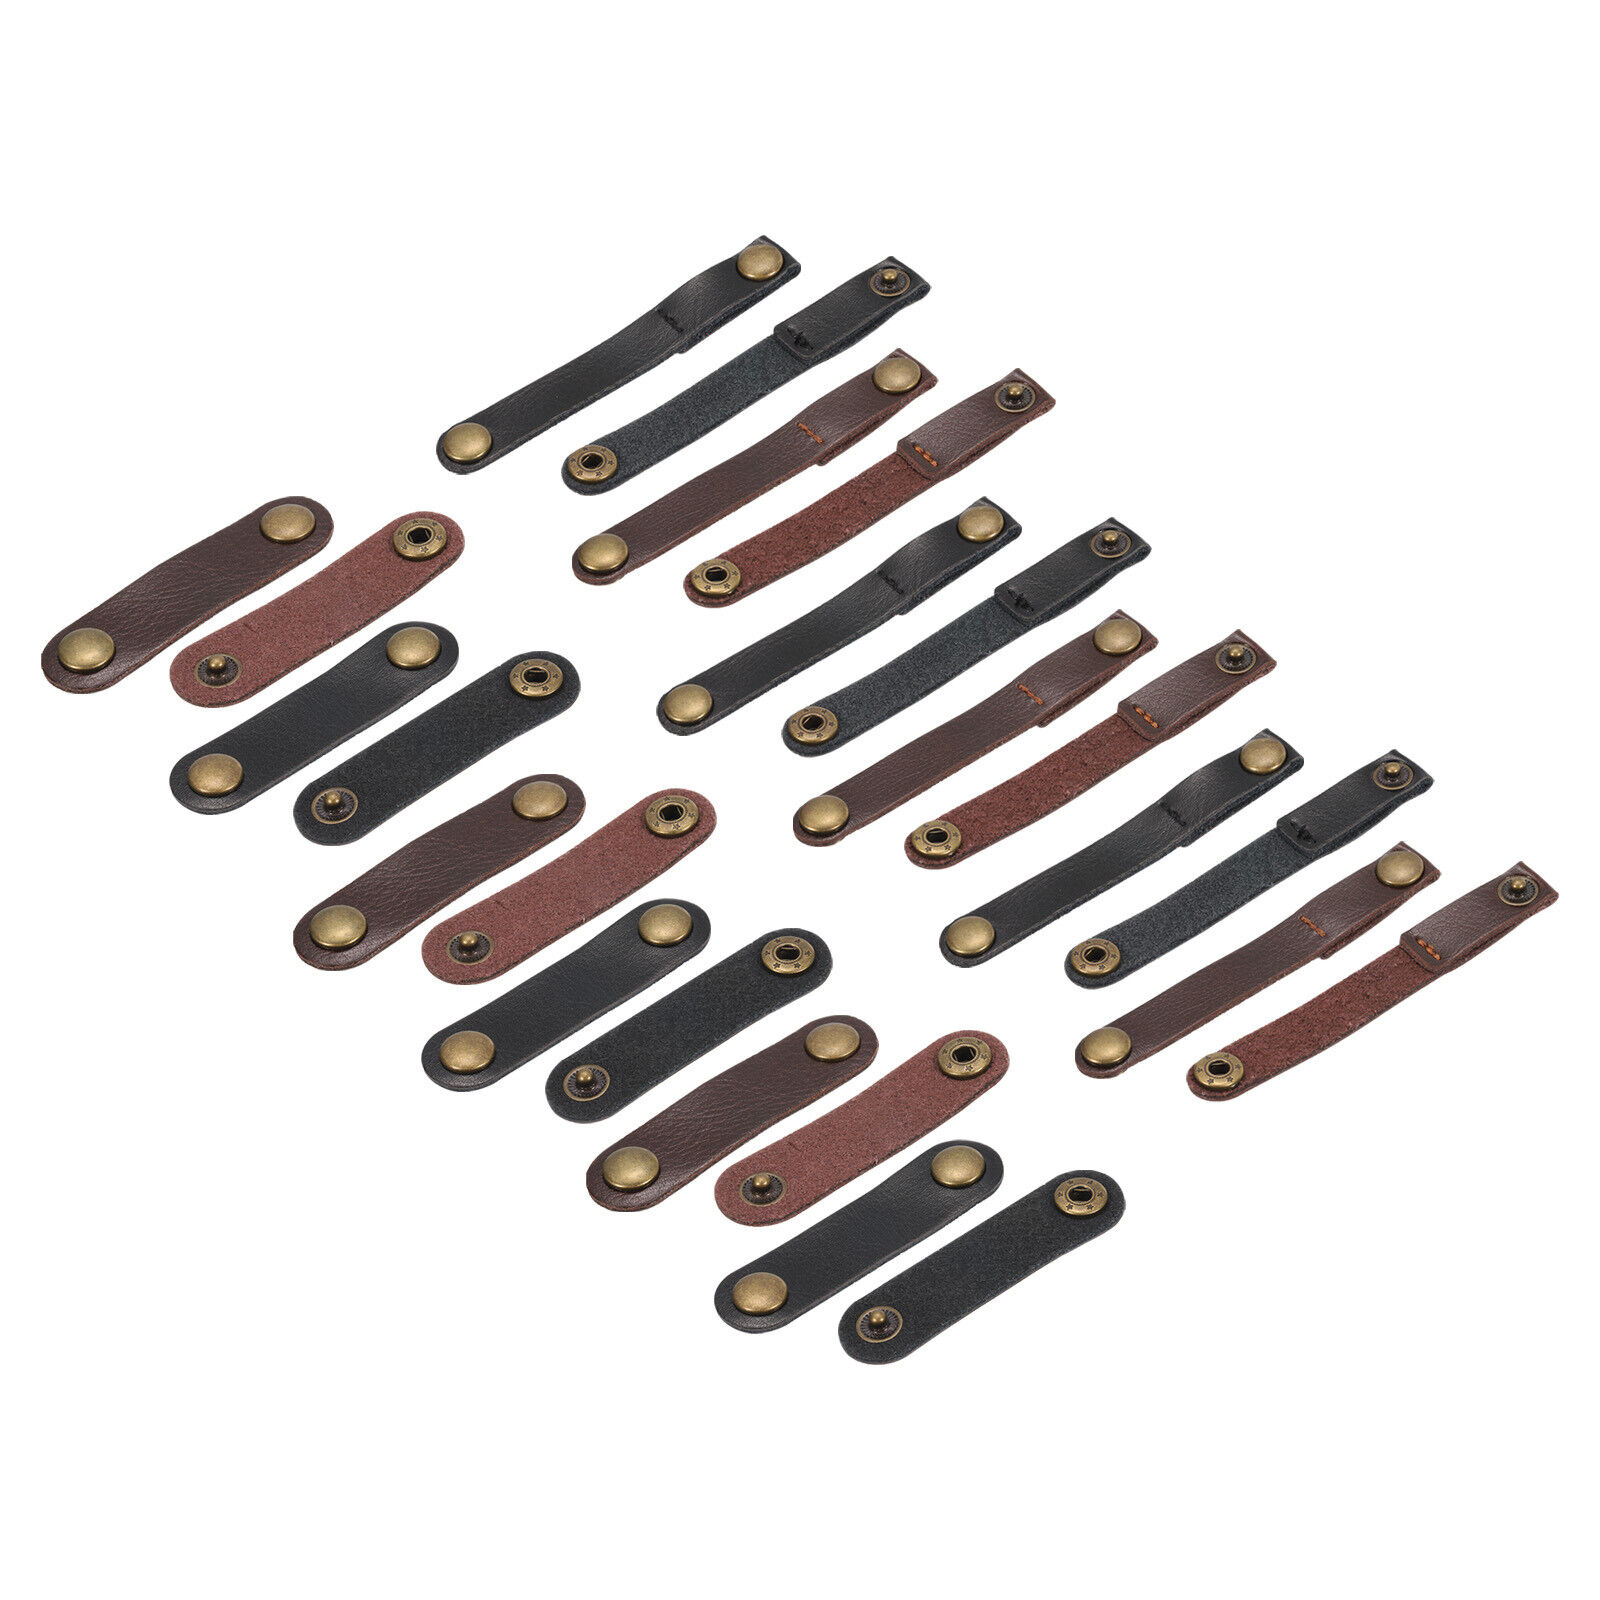 Leather Cable Straps Cable Ties Cord Organizer Black/Brown, 24 Pcs